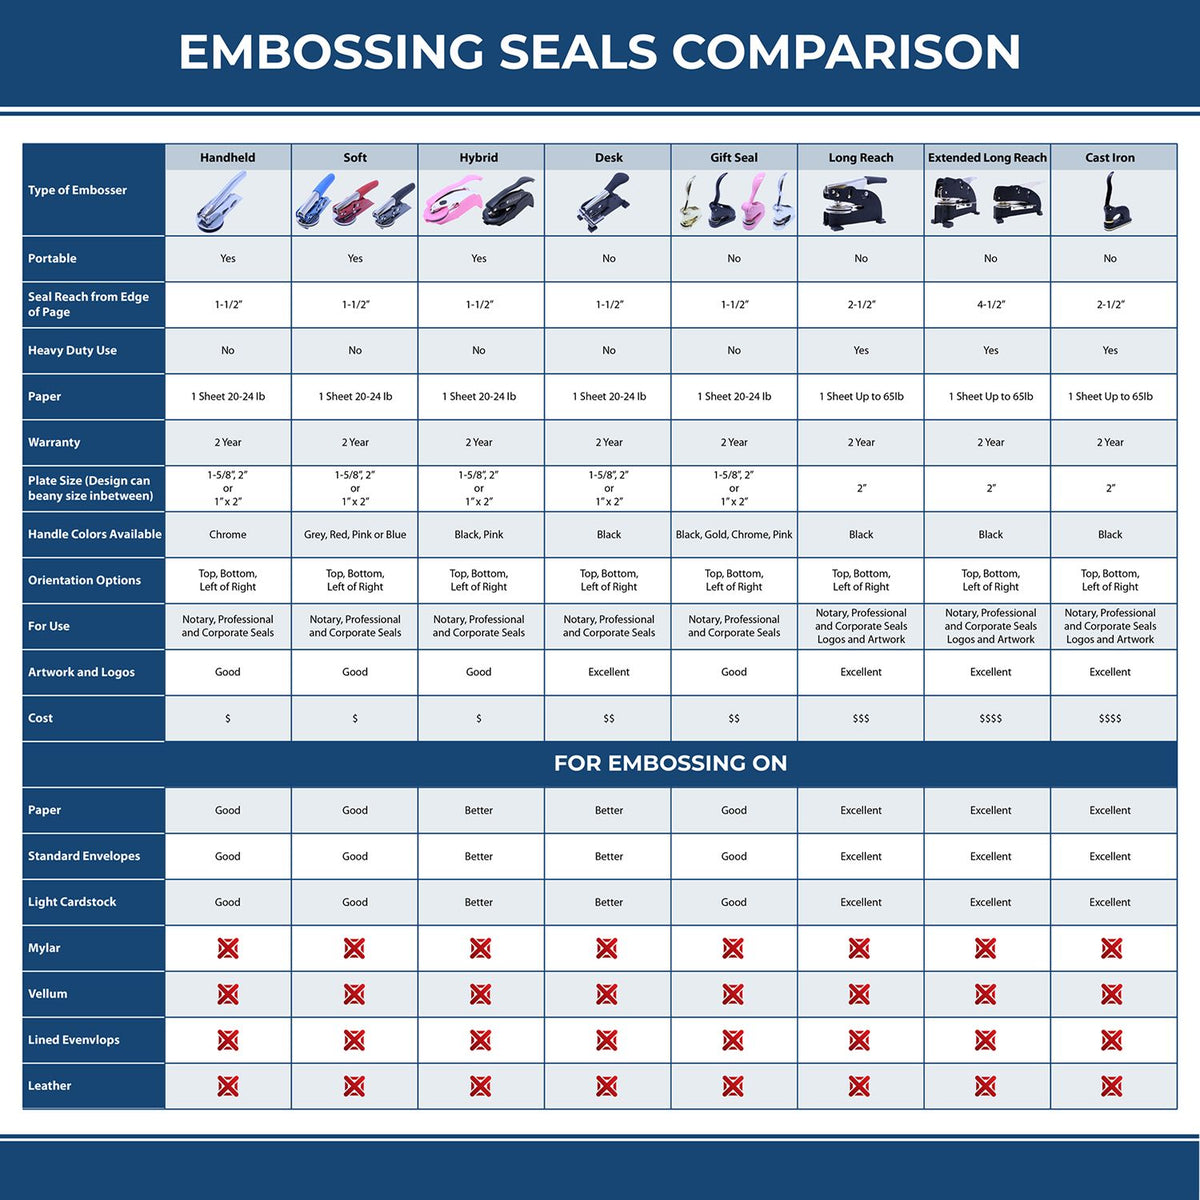 A comparison chart for the different types of mount models available for the Heavy Duty Cast Iron Nebraska Architect Embosser.